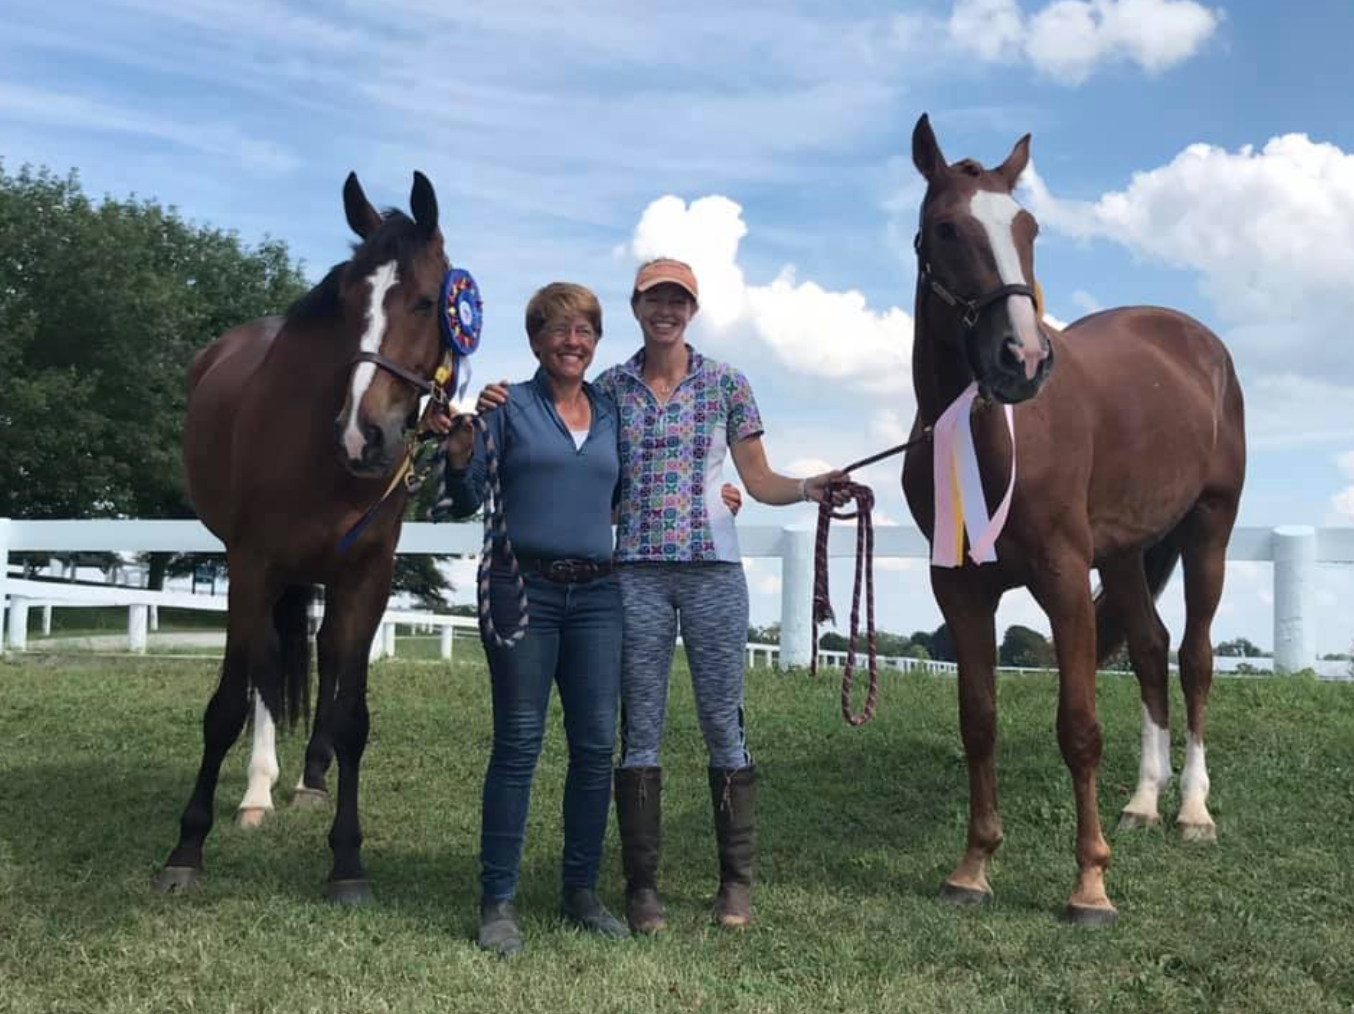 Excel Star horses shine at the American Eventing Championships!